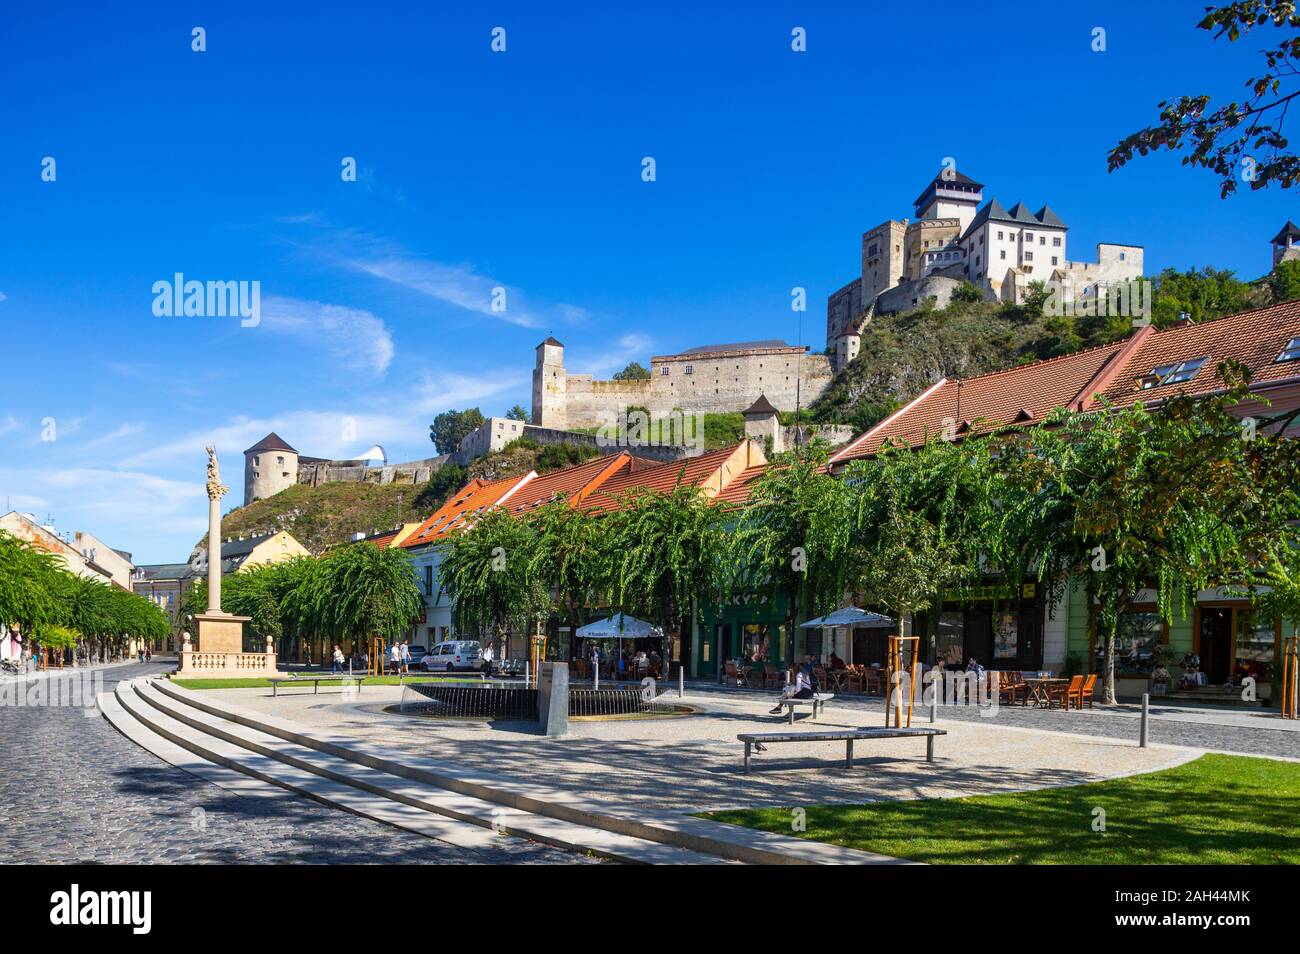 Slovakia, Trencin, Peace Square with Trencin Castle looming in background Stock Photo